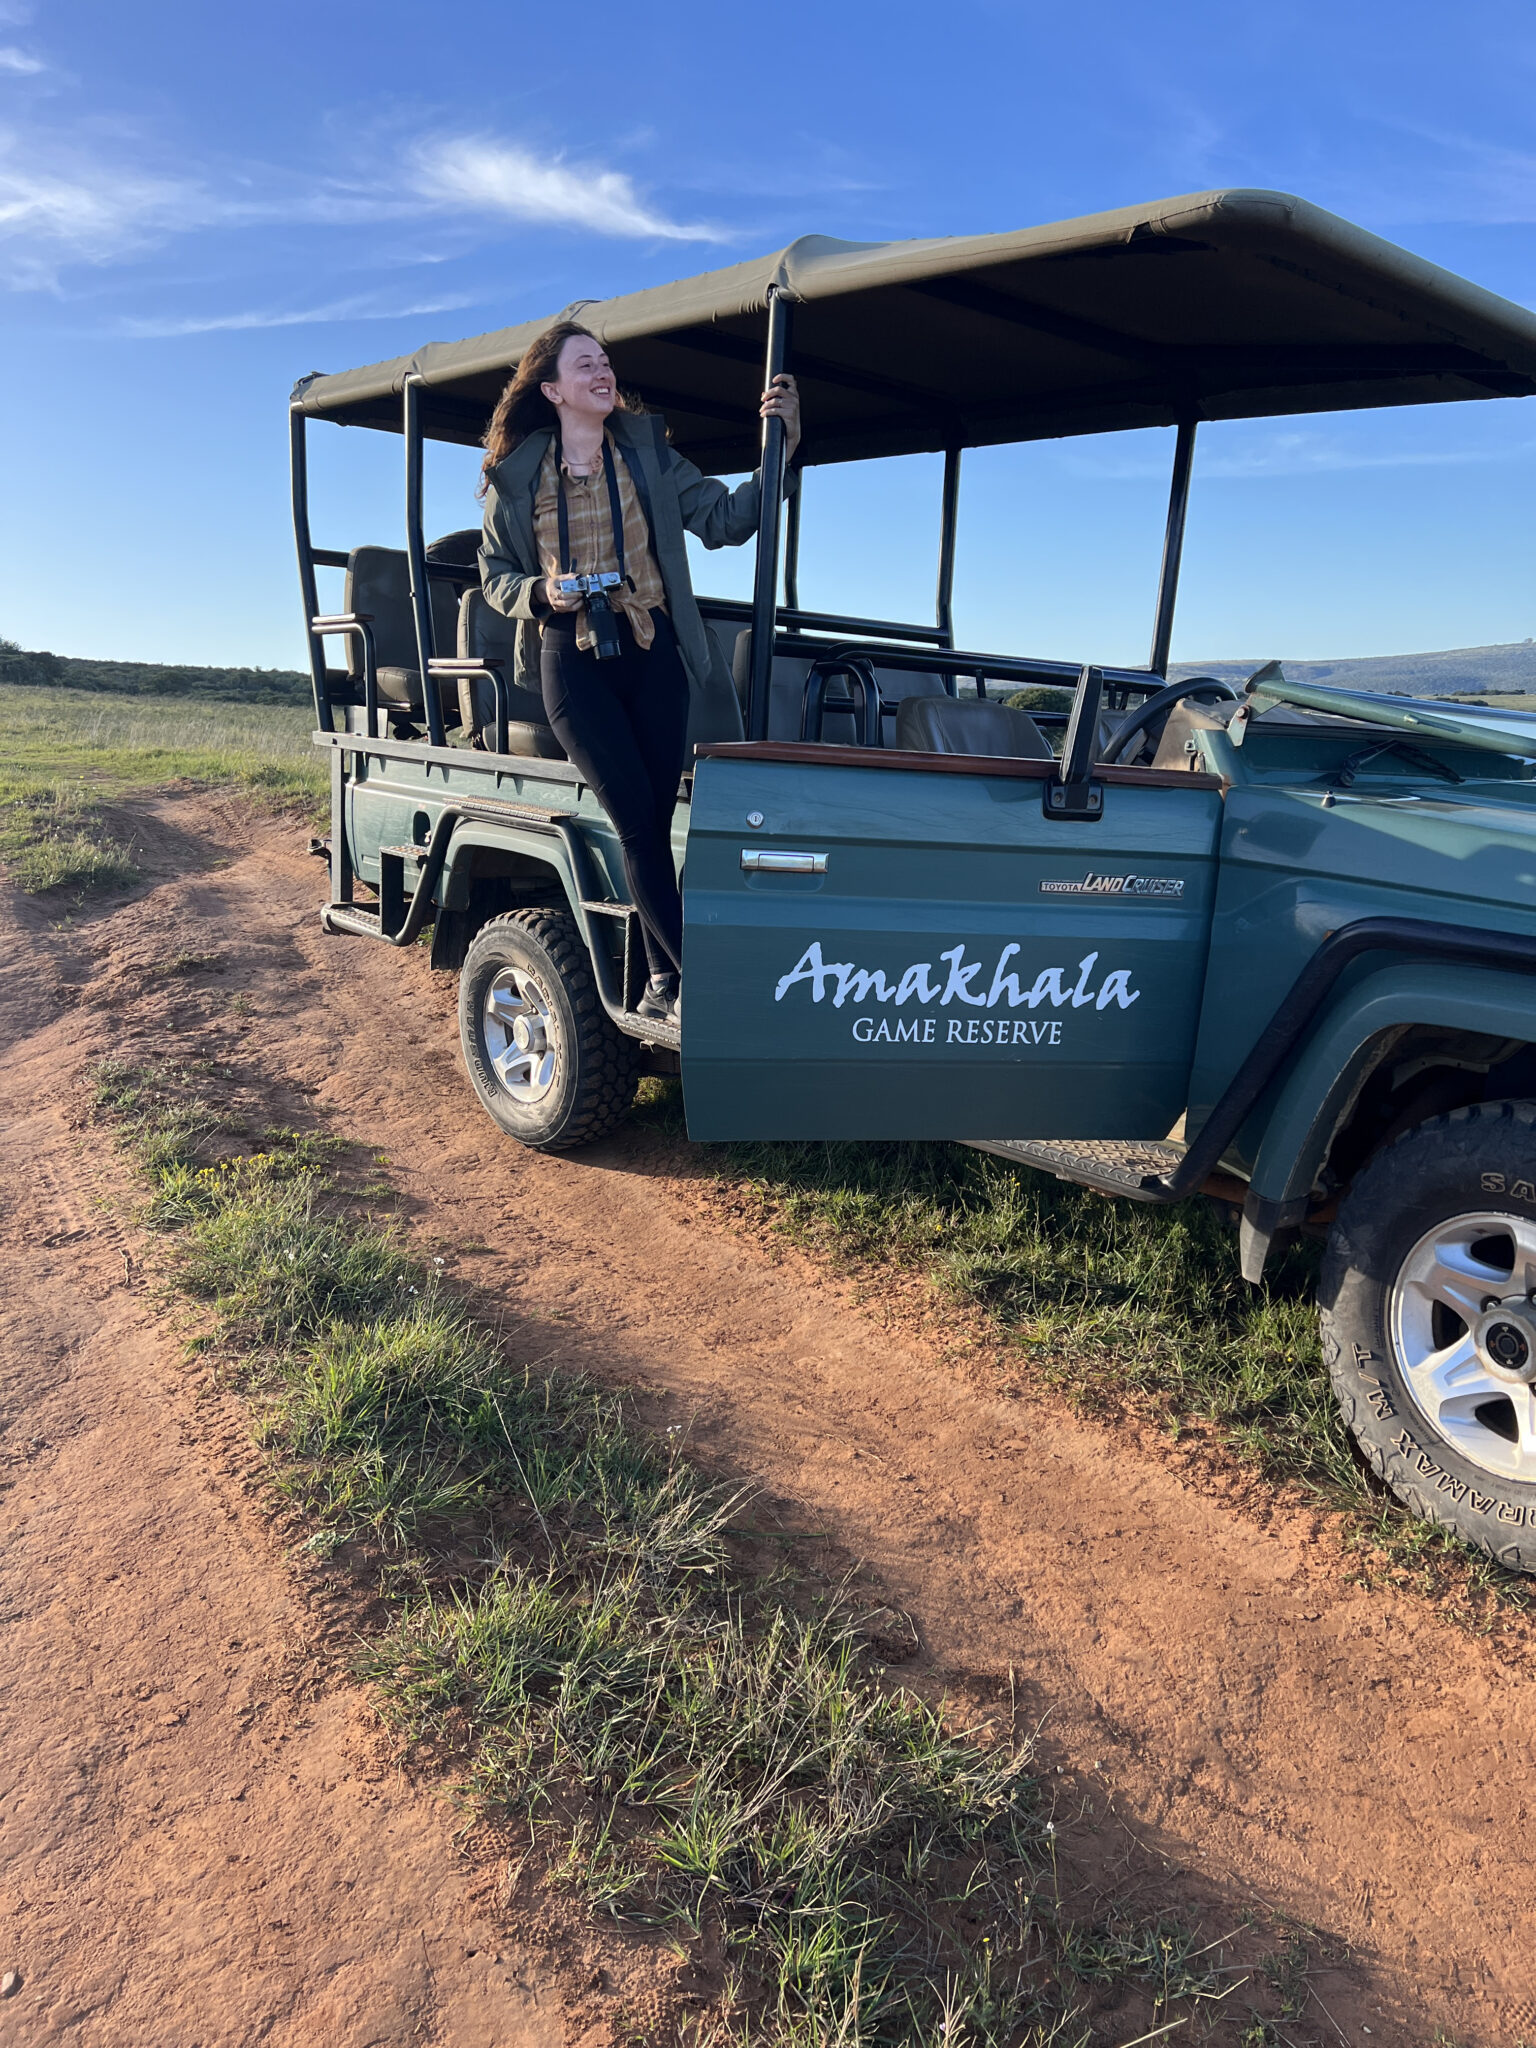 a person hangs out of a safari vehicle on a game reserve